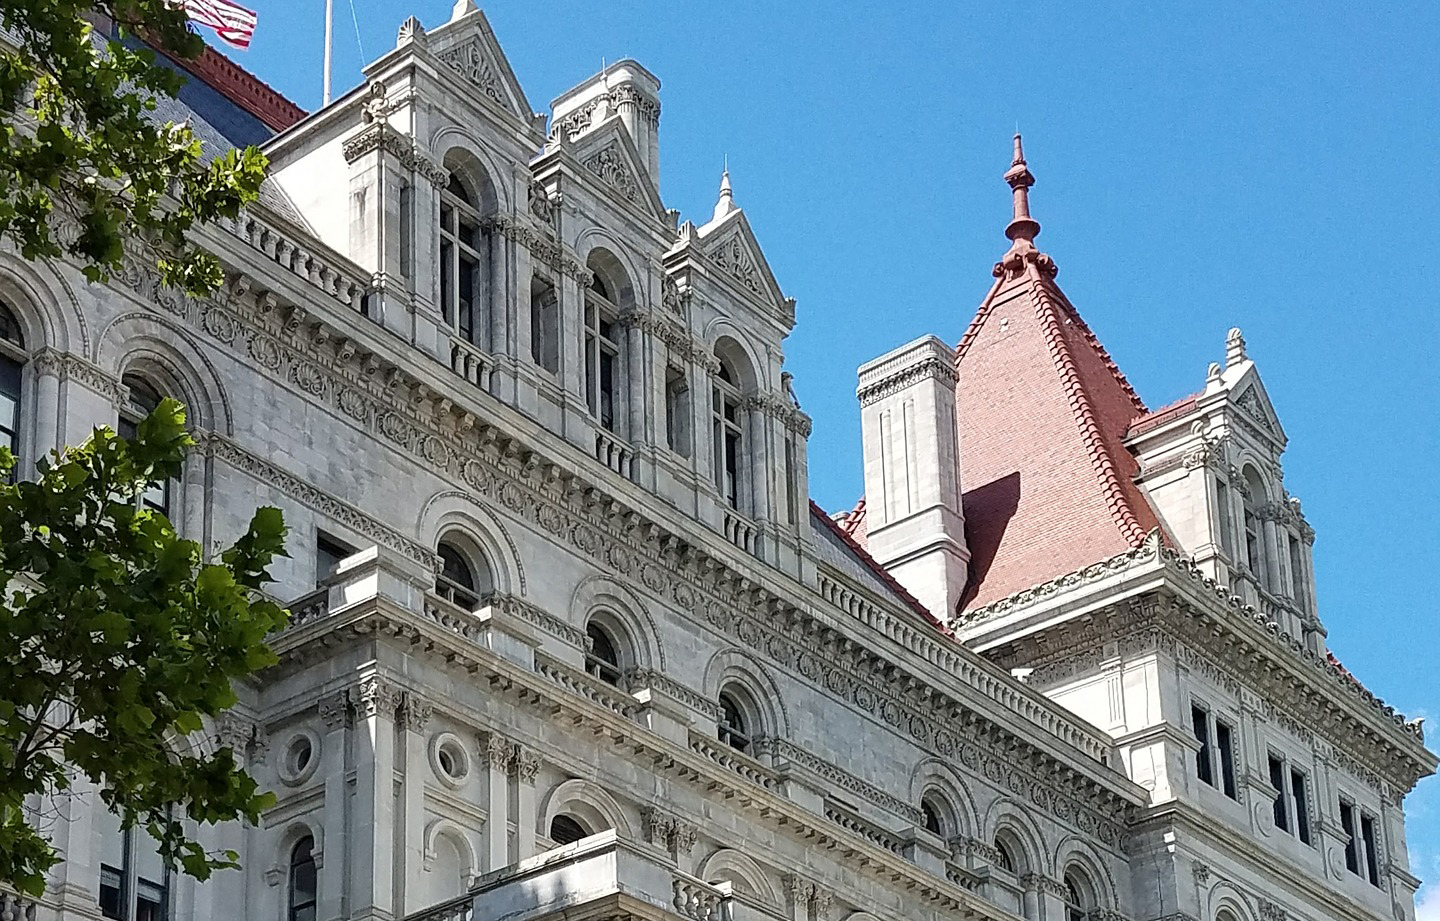 Close up detail of part of the New York State Capitol building.